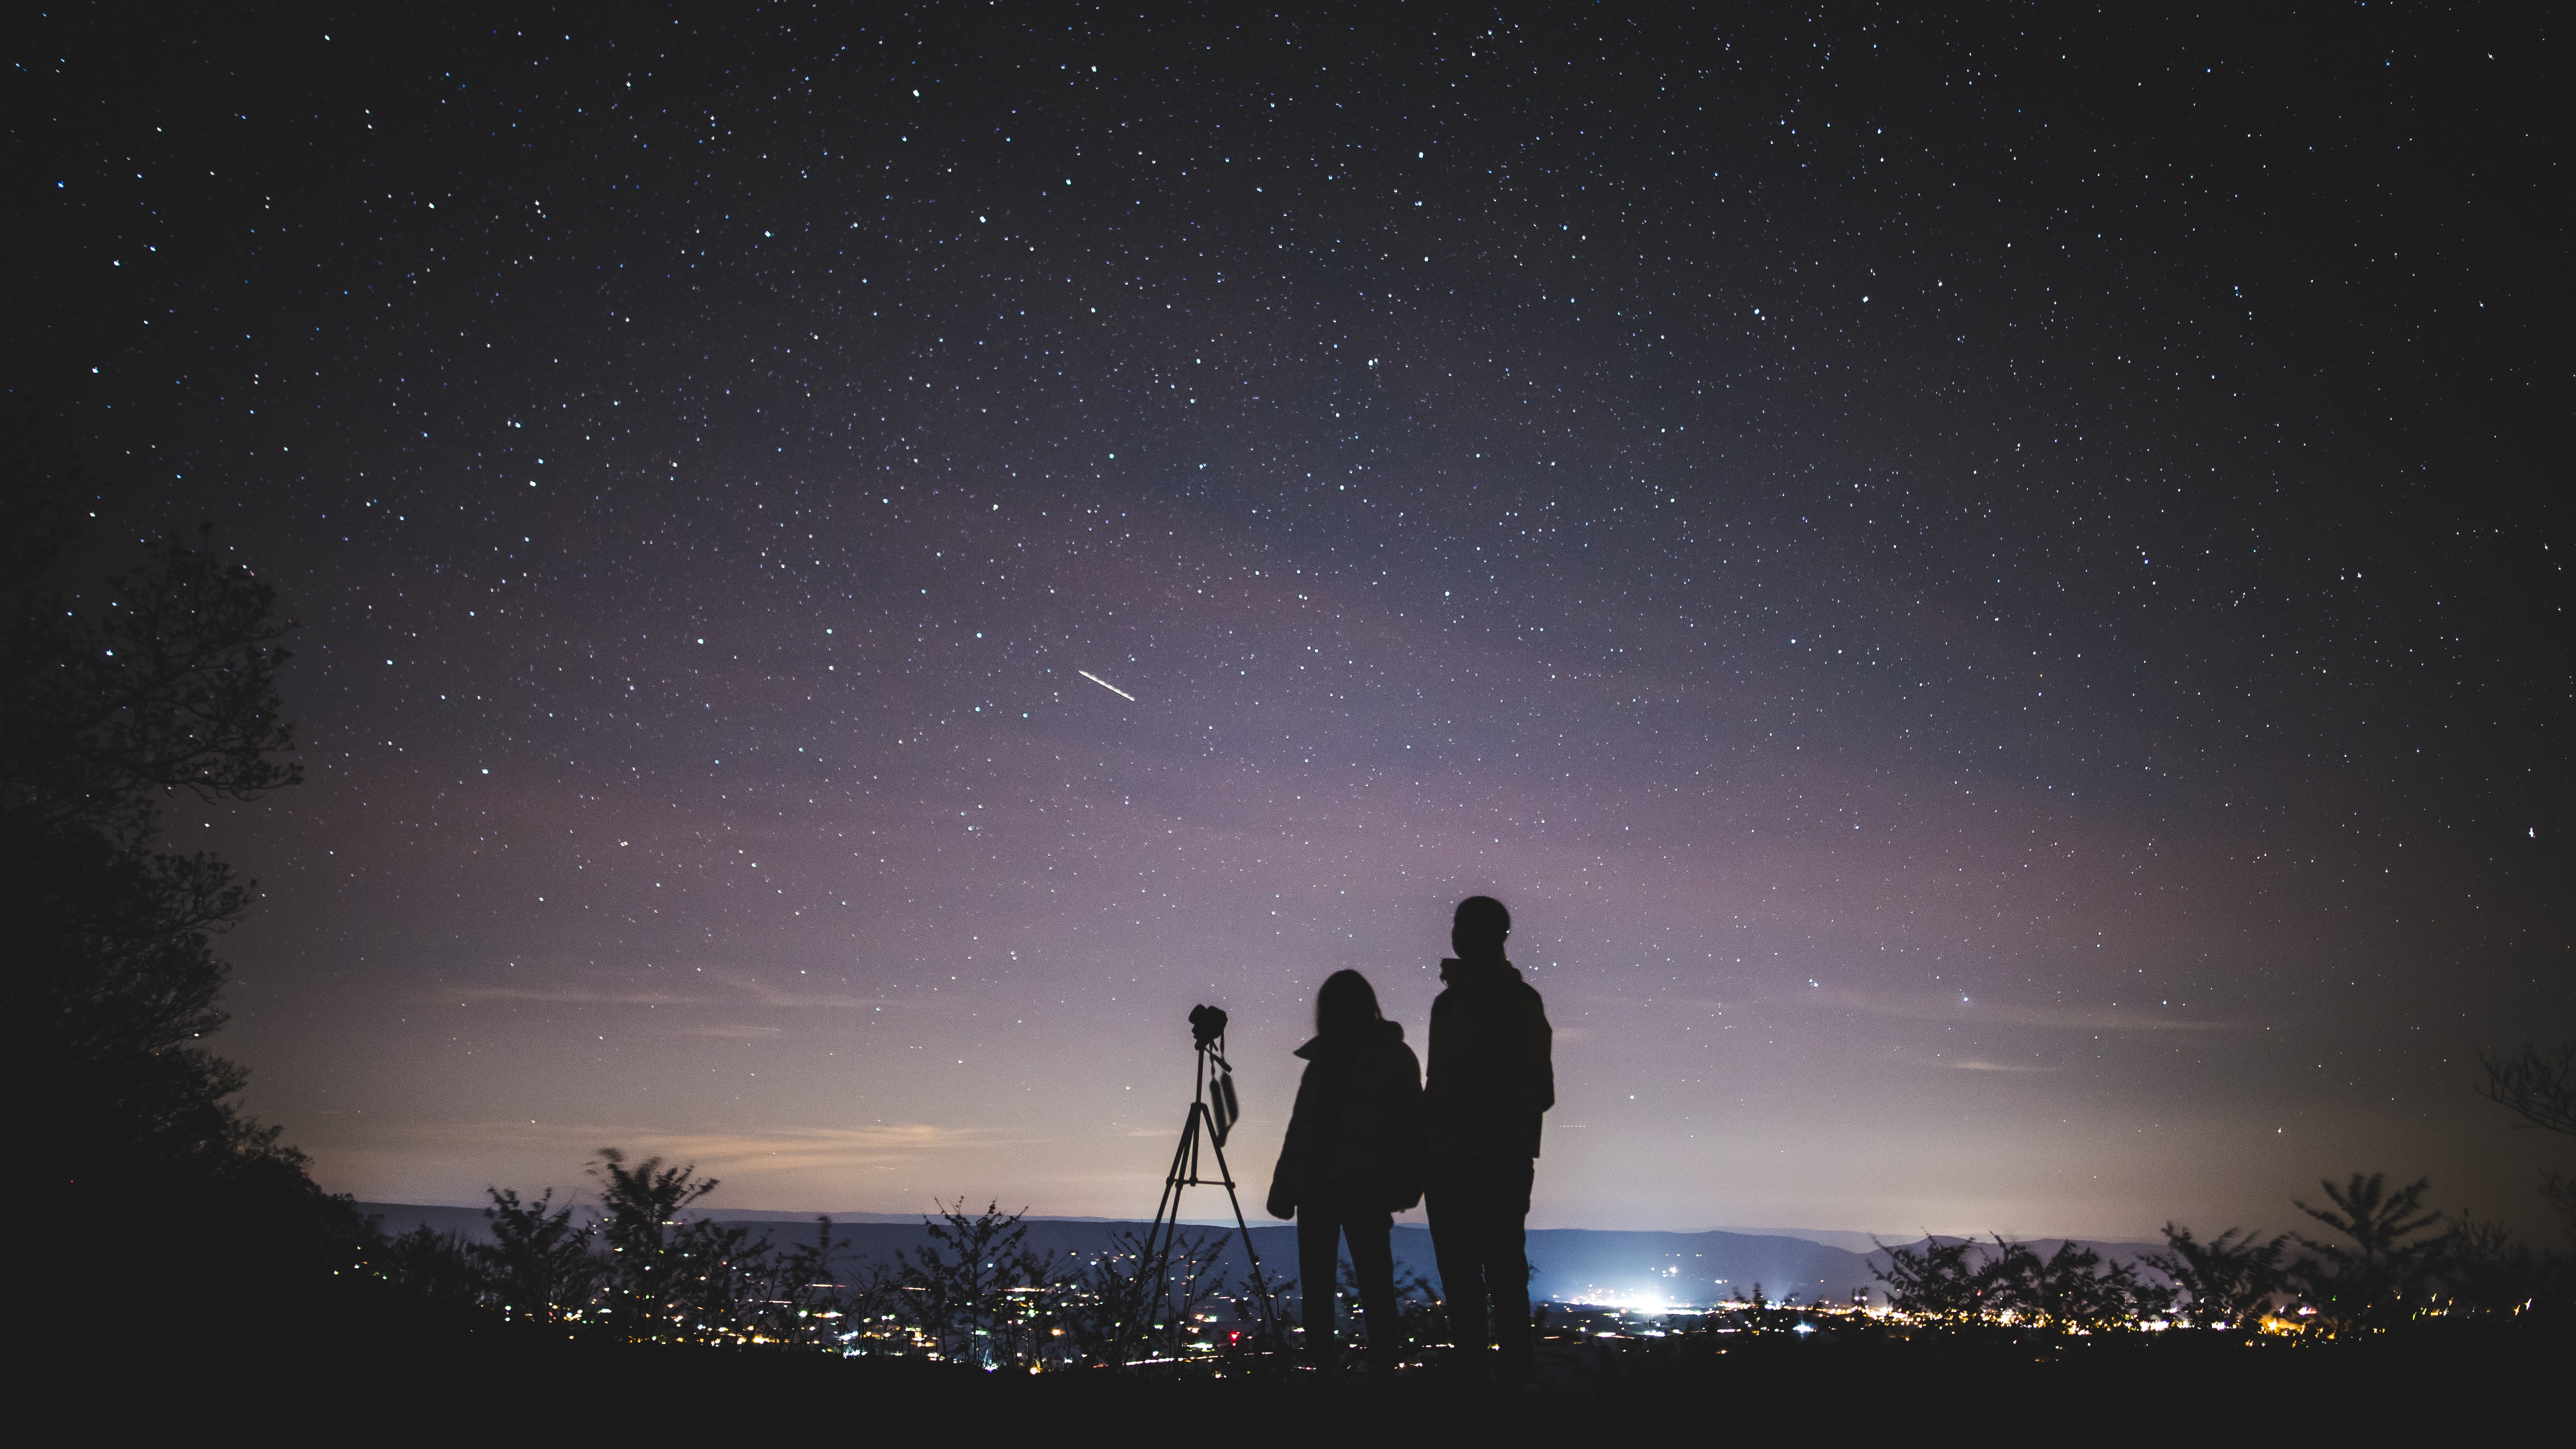 astrophotography wallpaper,sky,photograph,night,atmosphere,star